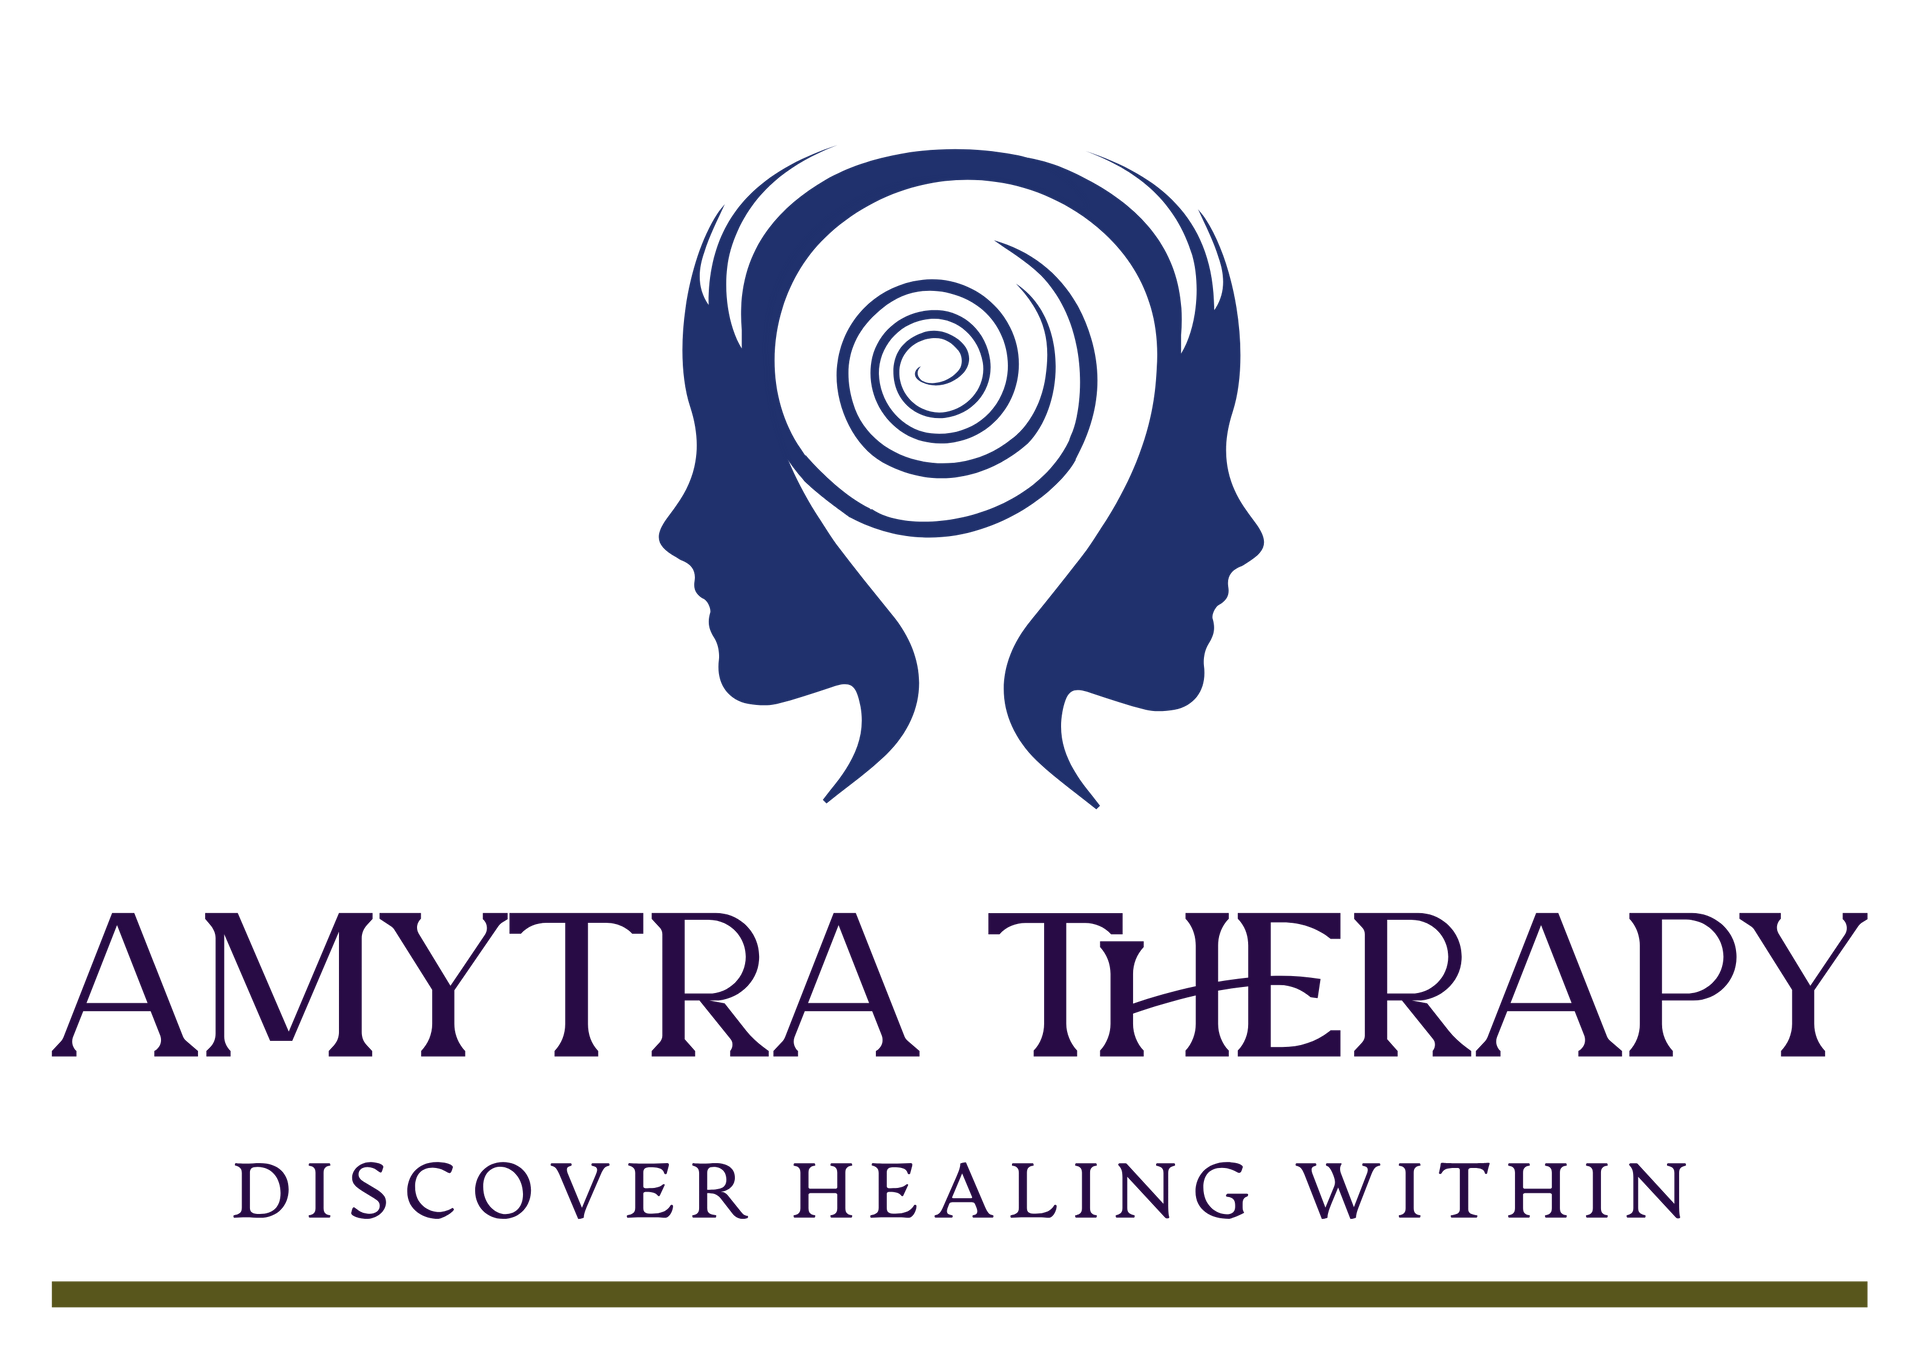 Amytra therapy discover healing within logo